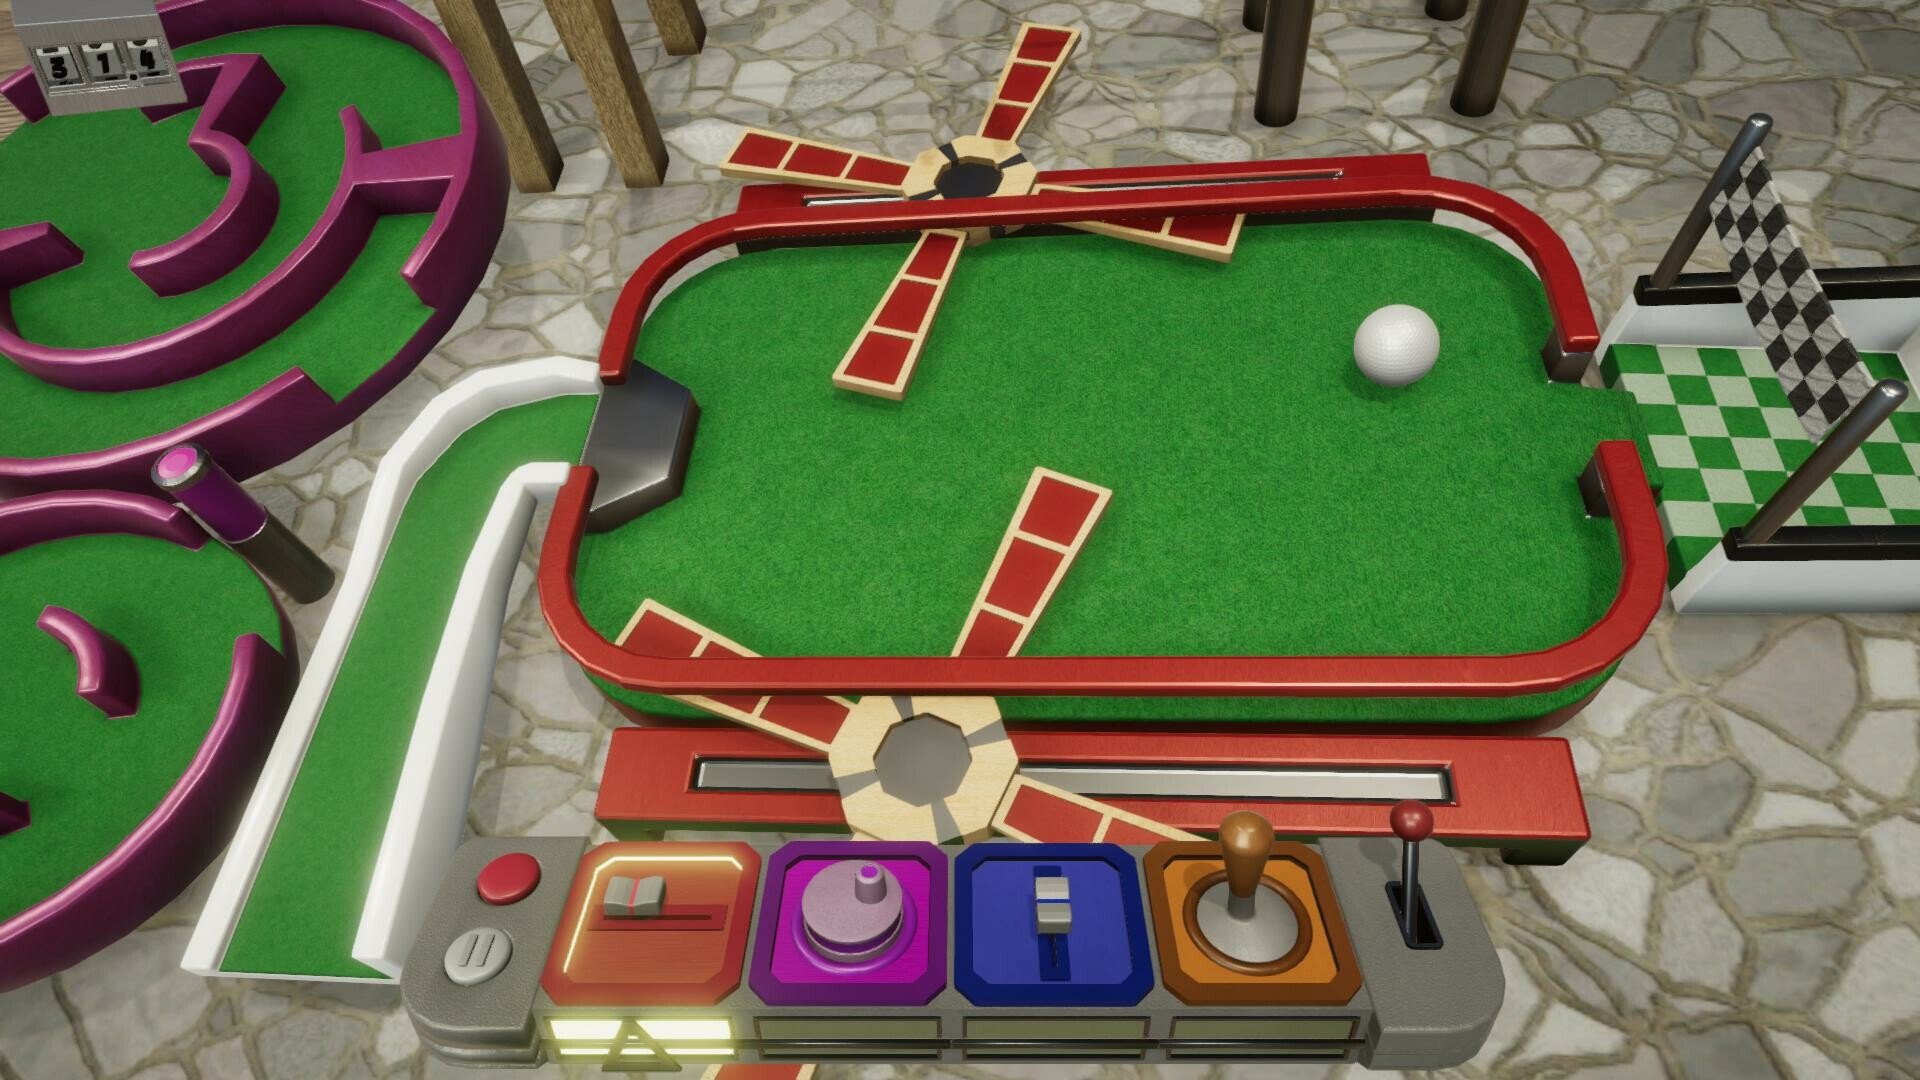 Image is from game Mighty Marbles. It features multiple toy like structure - wind mill fans, slider, Courtyard and controllers.